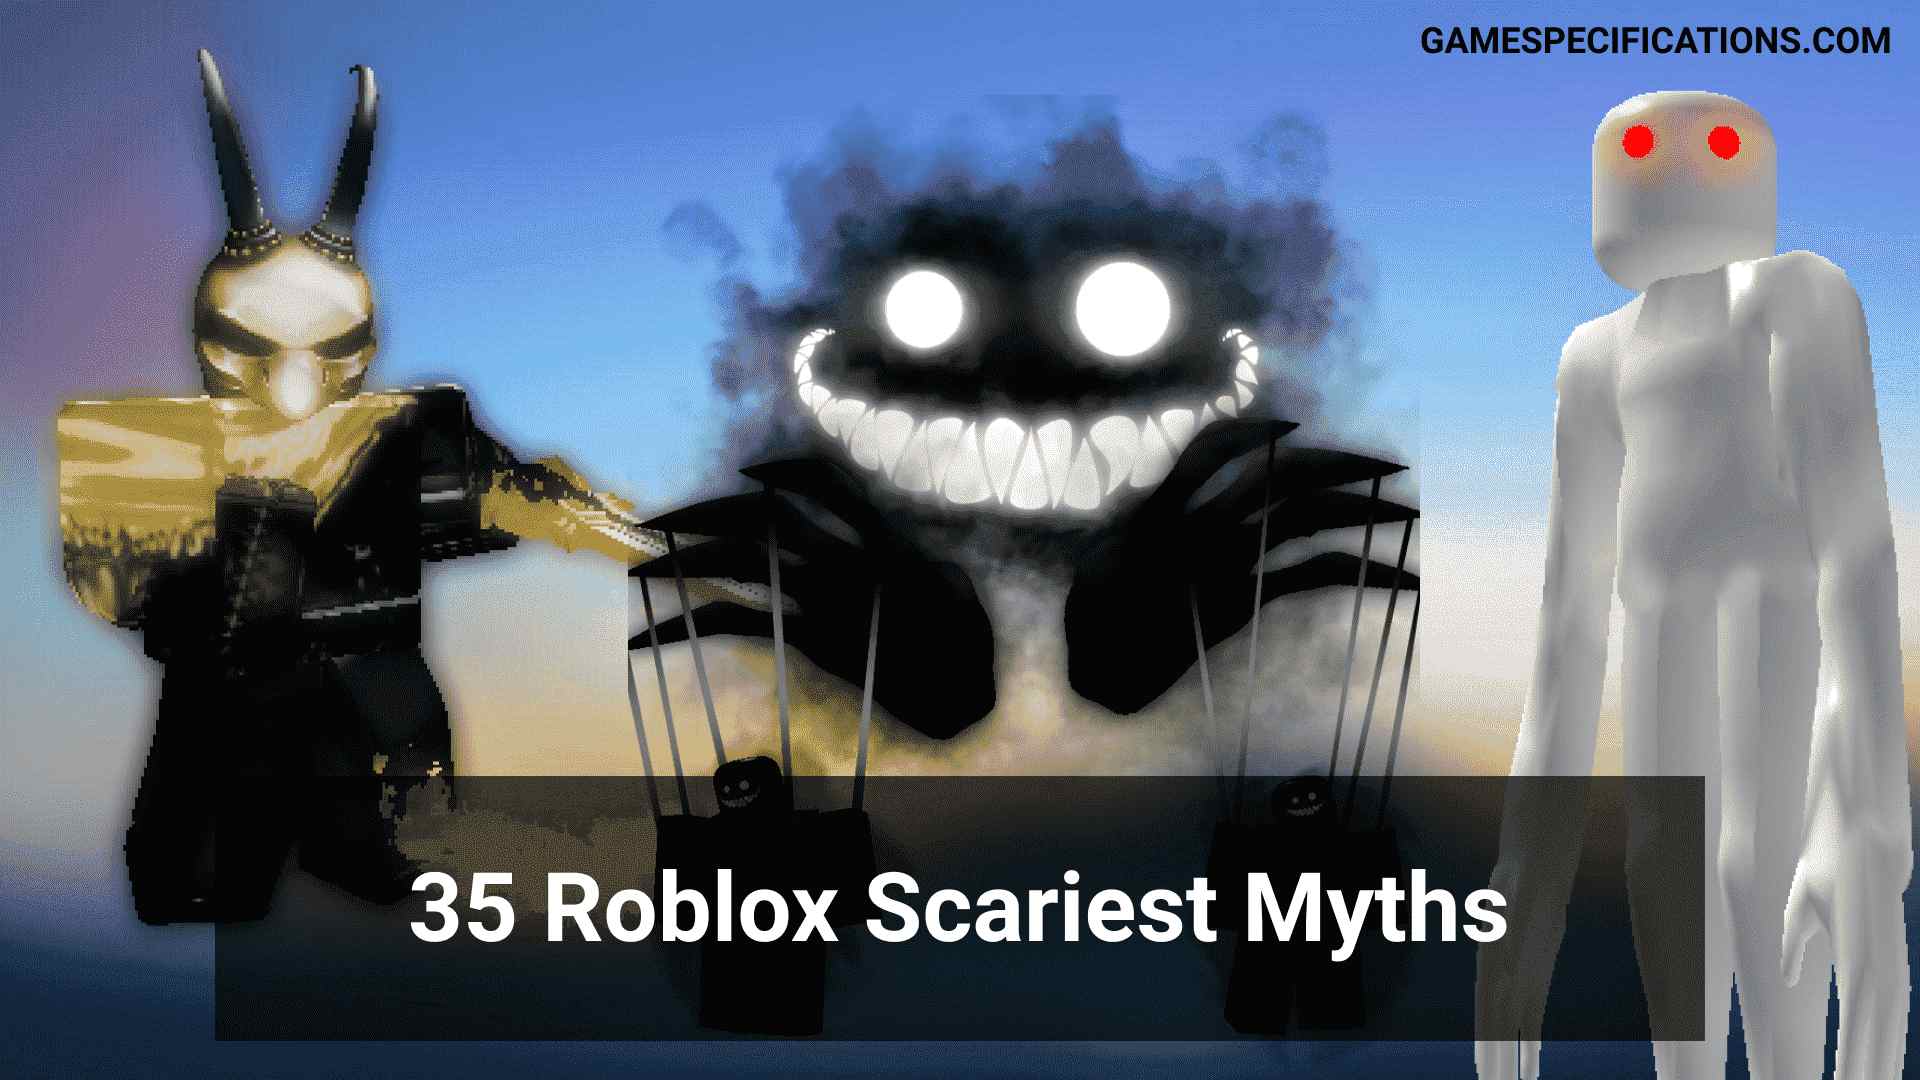 Roblox Myths A Scary Universe Of Roblox Game Specifications - cult family roblox fanart